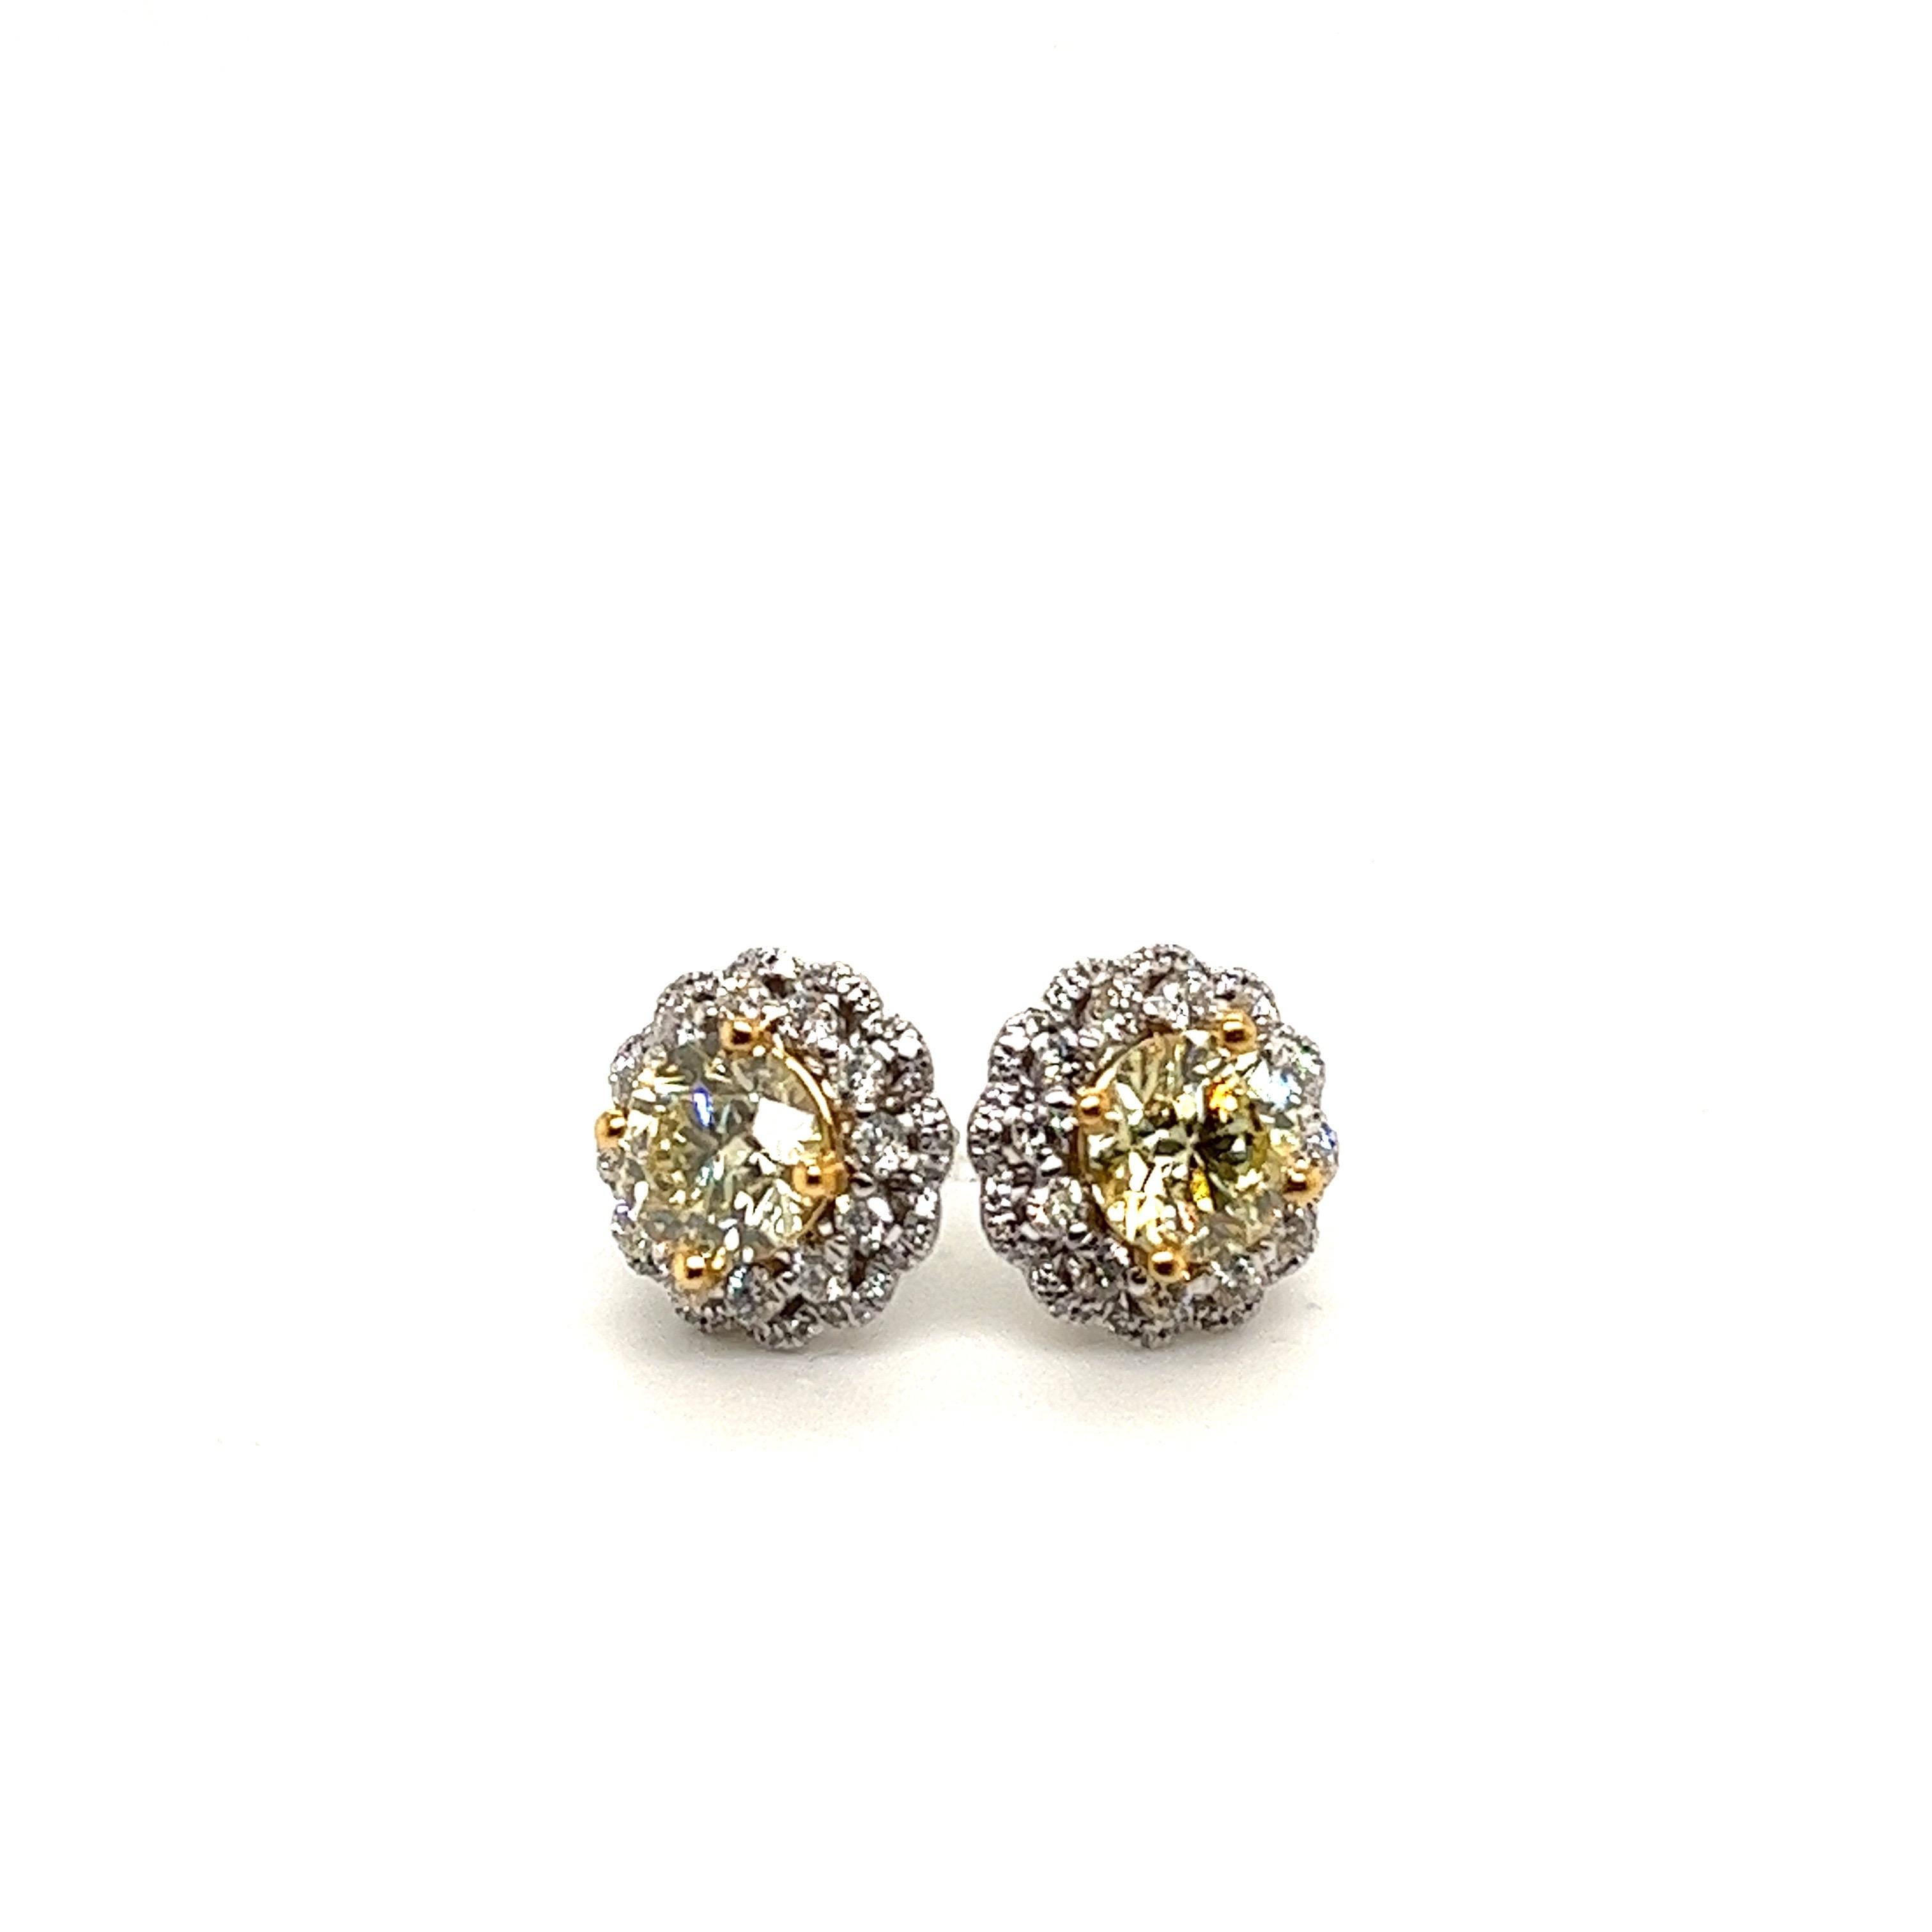 18K white and yellow gold suite
Earrings:
Two yellow Diamonds 3.04 cts total
0.81 cts white diamonds
Ring:
One yellow Diamond 2.00 cts
White diamonds 0.70 ct
